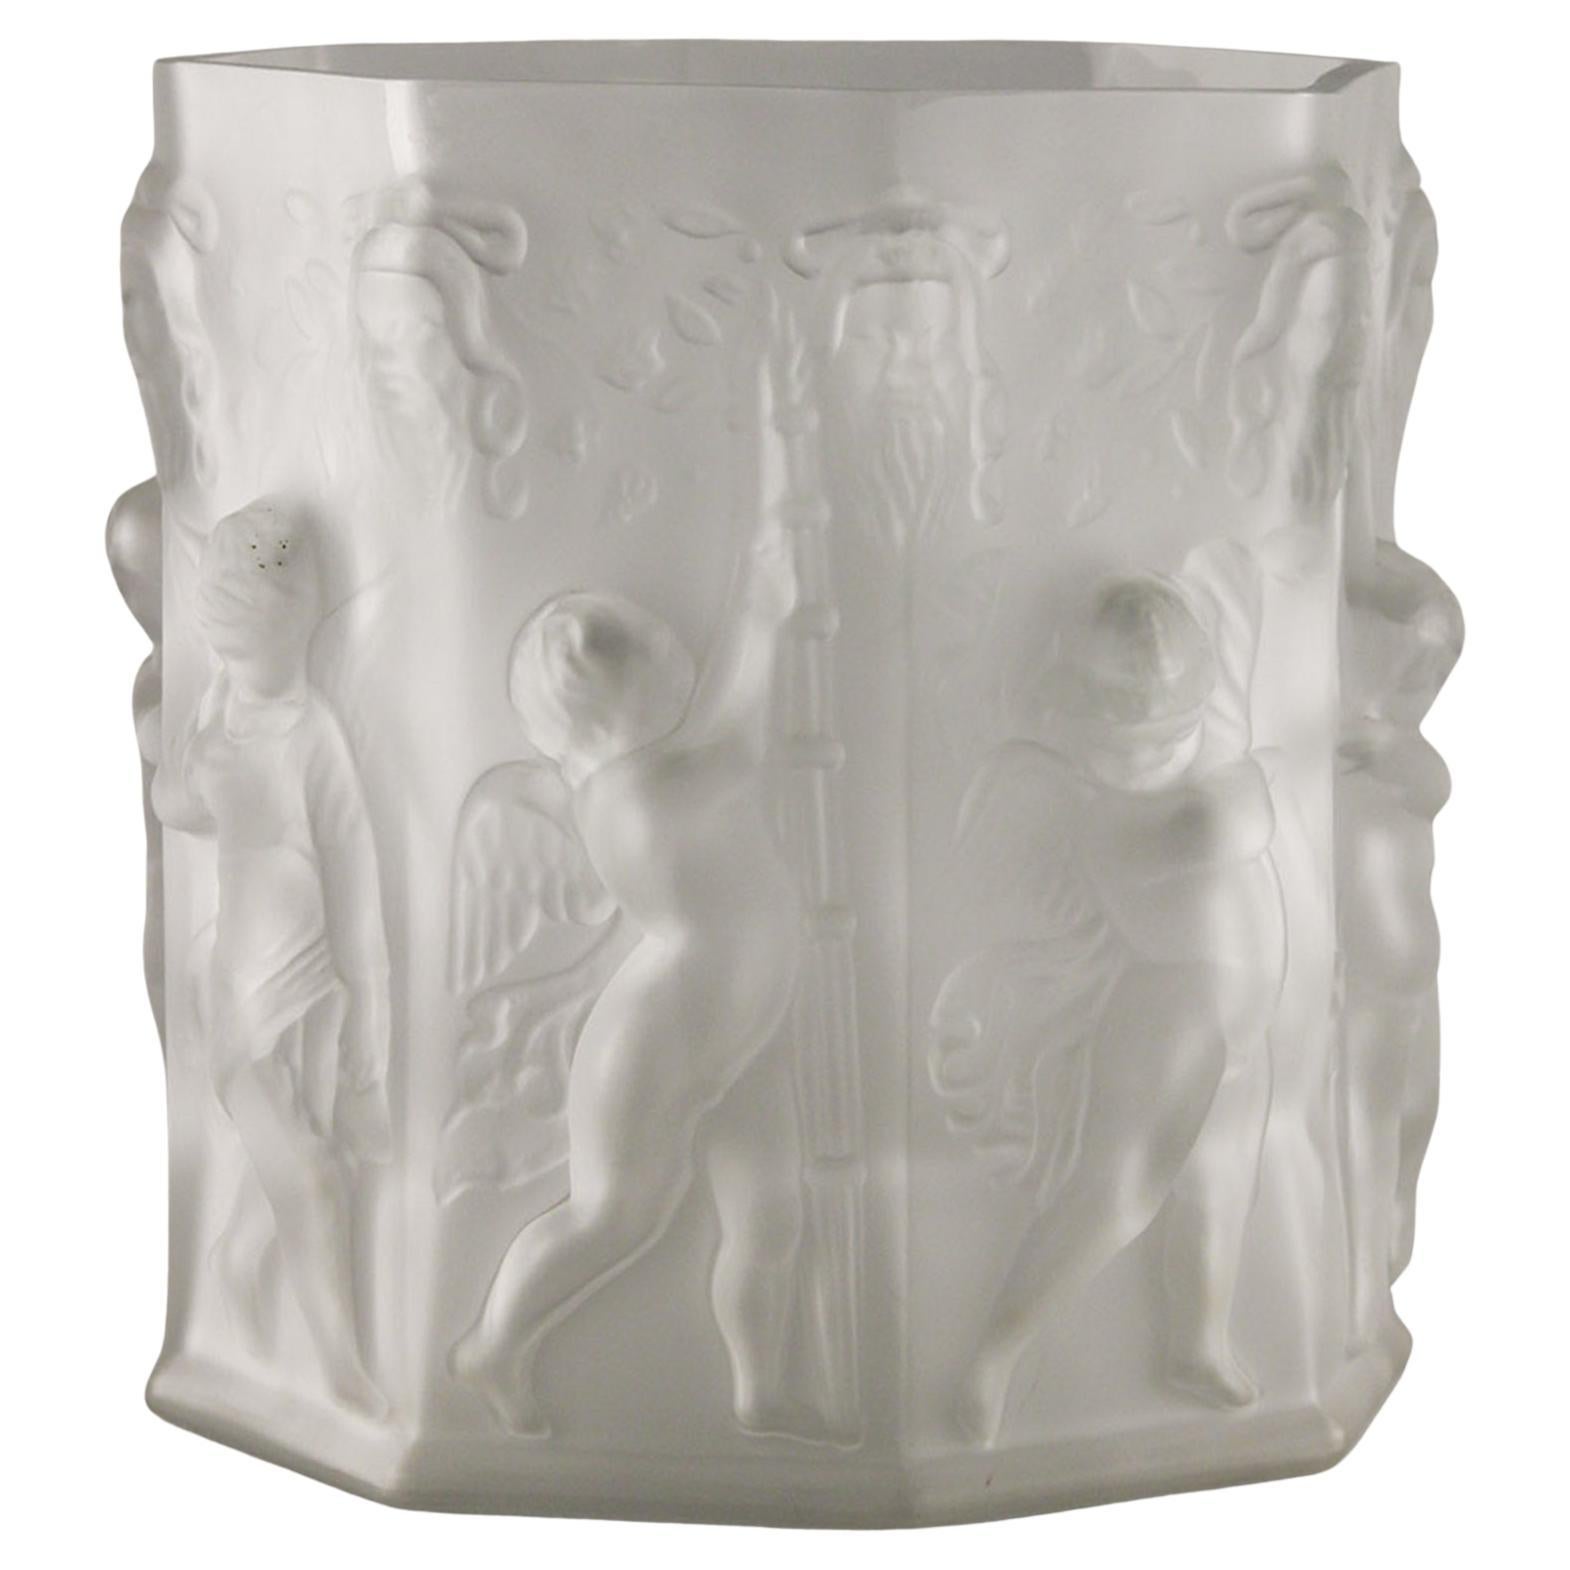 Early 20th C. French Octagonal Frosted Glass Vase Centerpiece with Cherubs